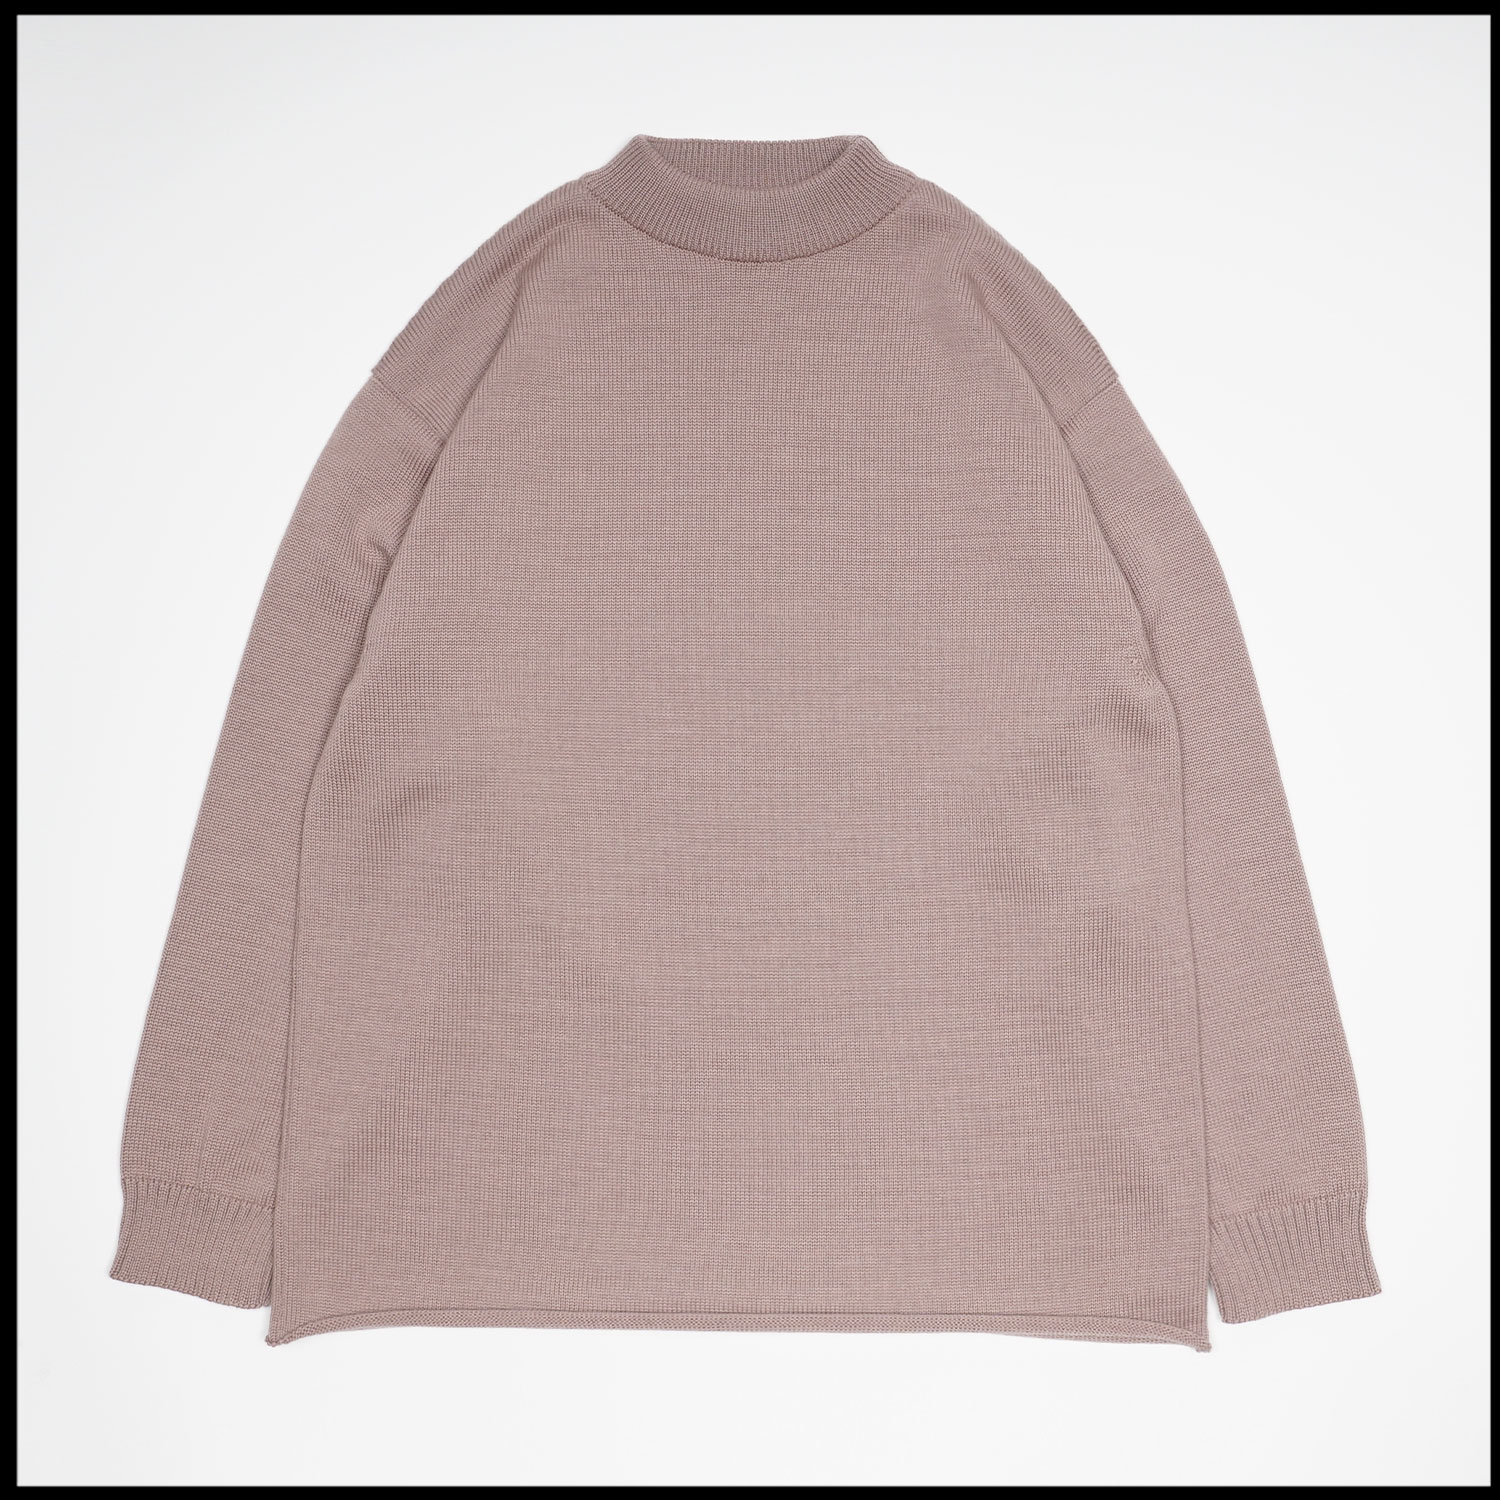 DYCE in Raspberry grey color by Arpenteur